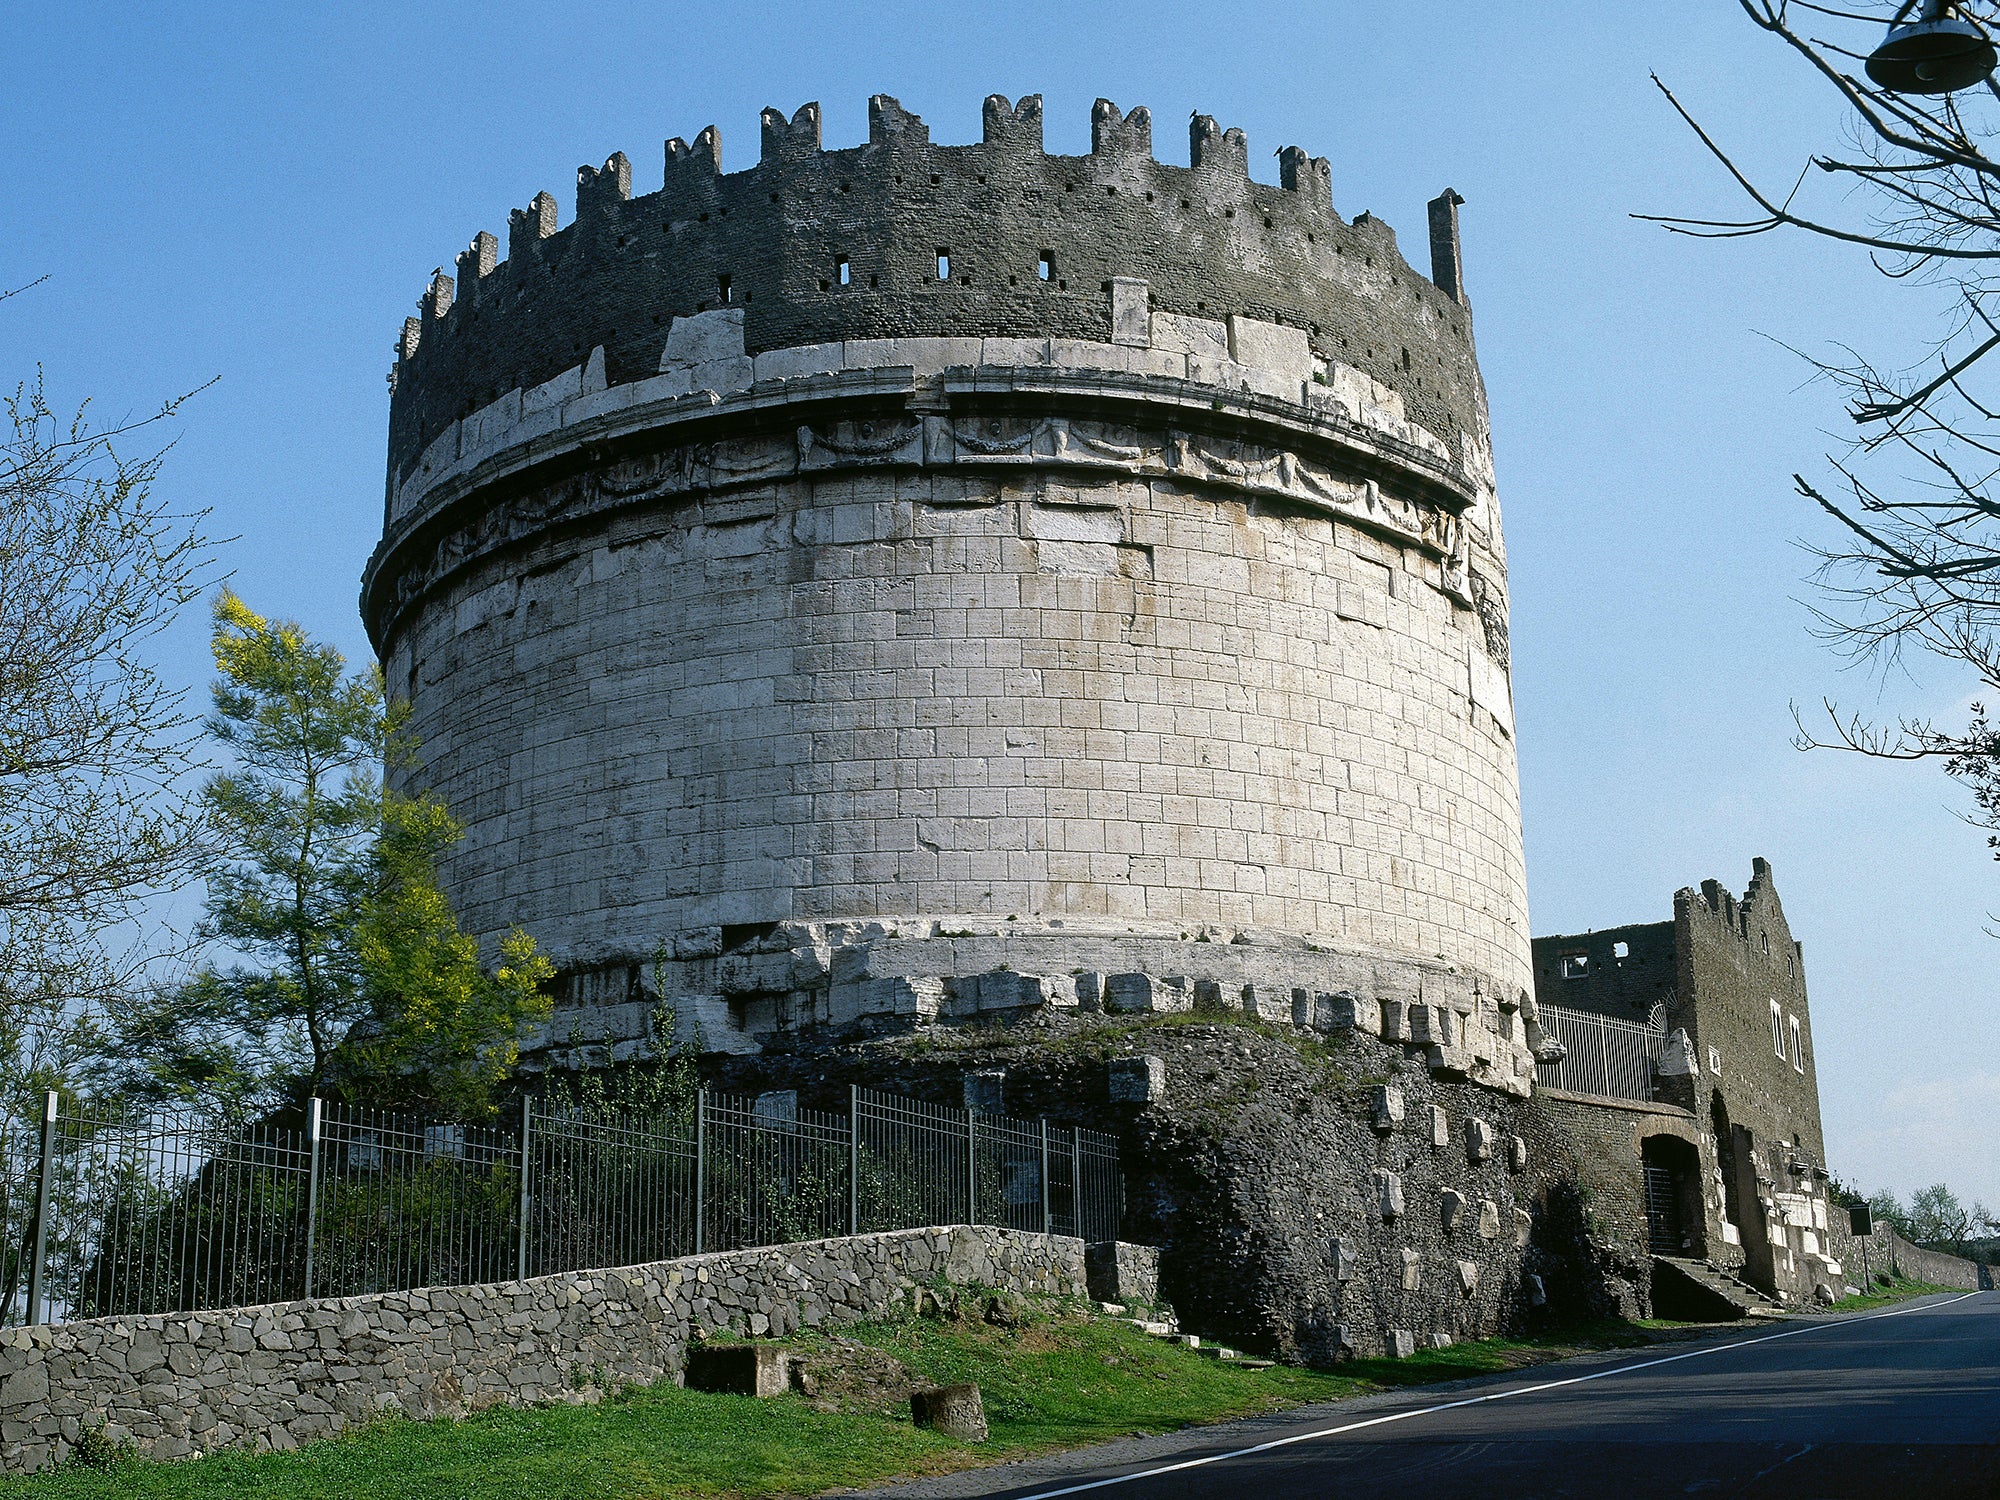 Built in 1 BCE, the Tomb of Caecilia Metella rests on a base of Roman concrete. Many of the city’s long-standing landmarks were built with a version of the mixture.